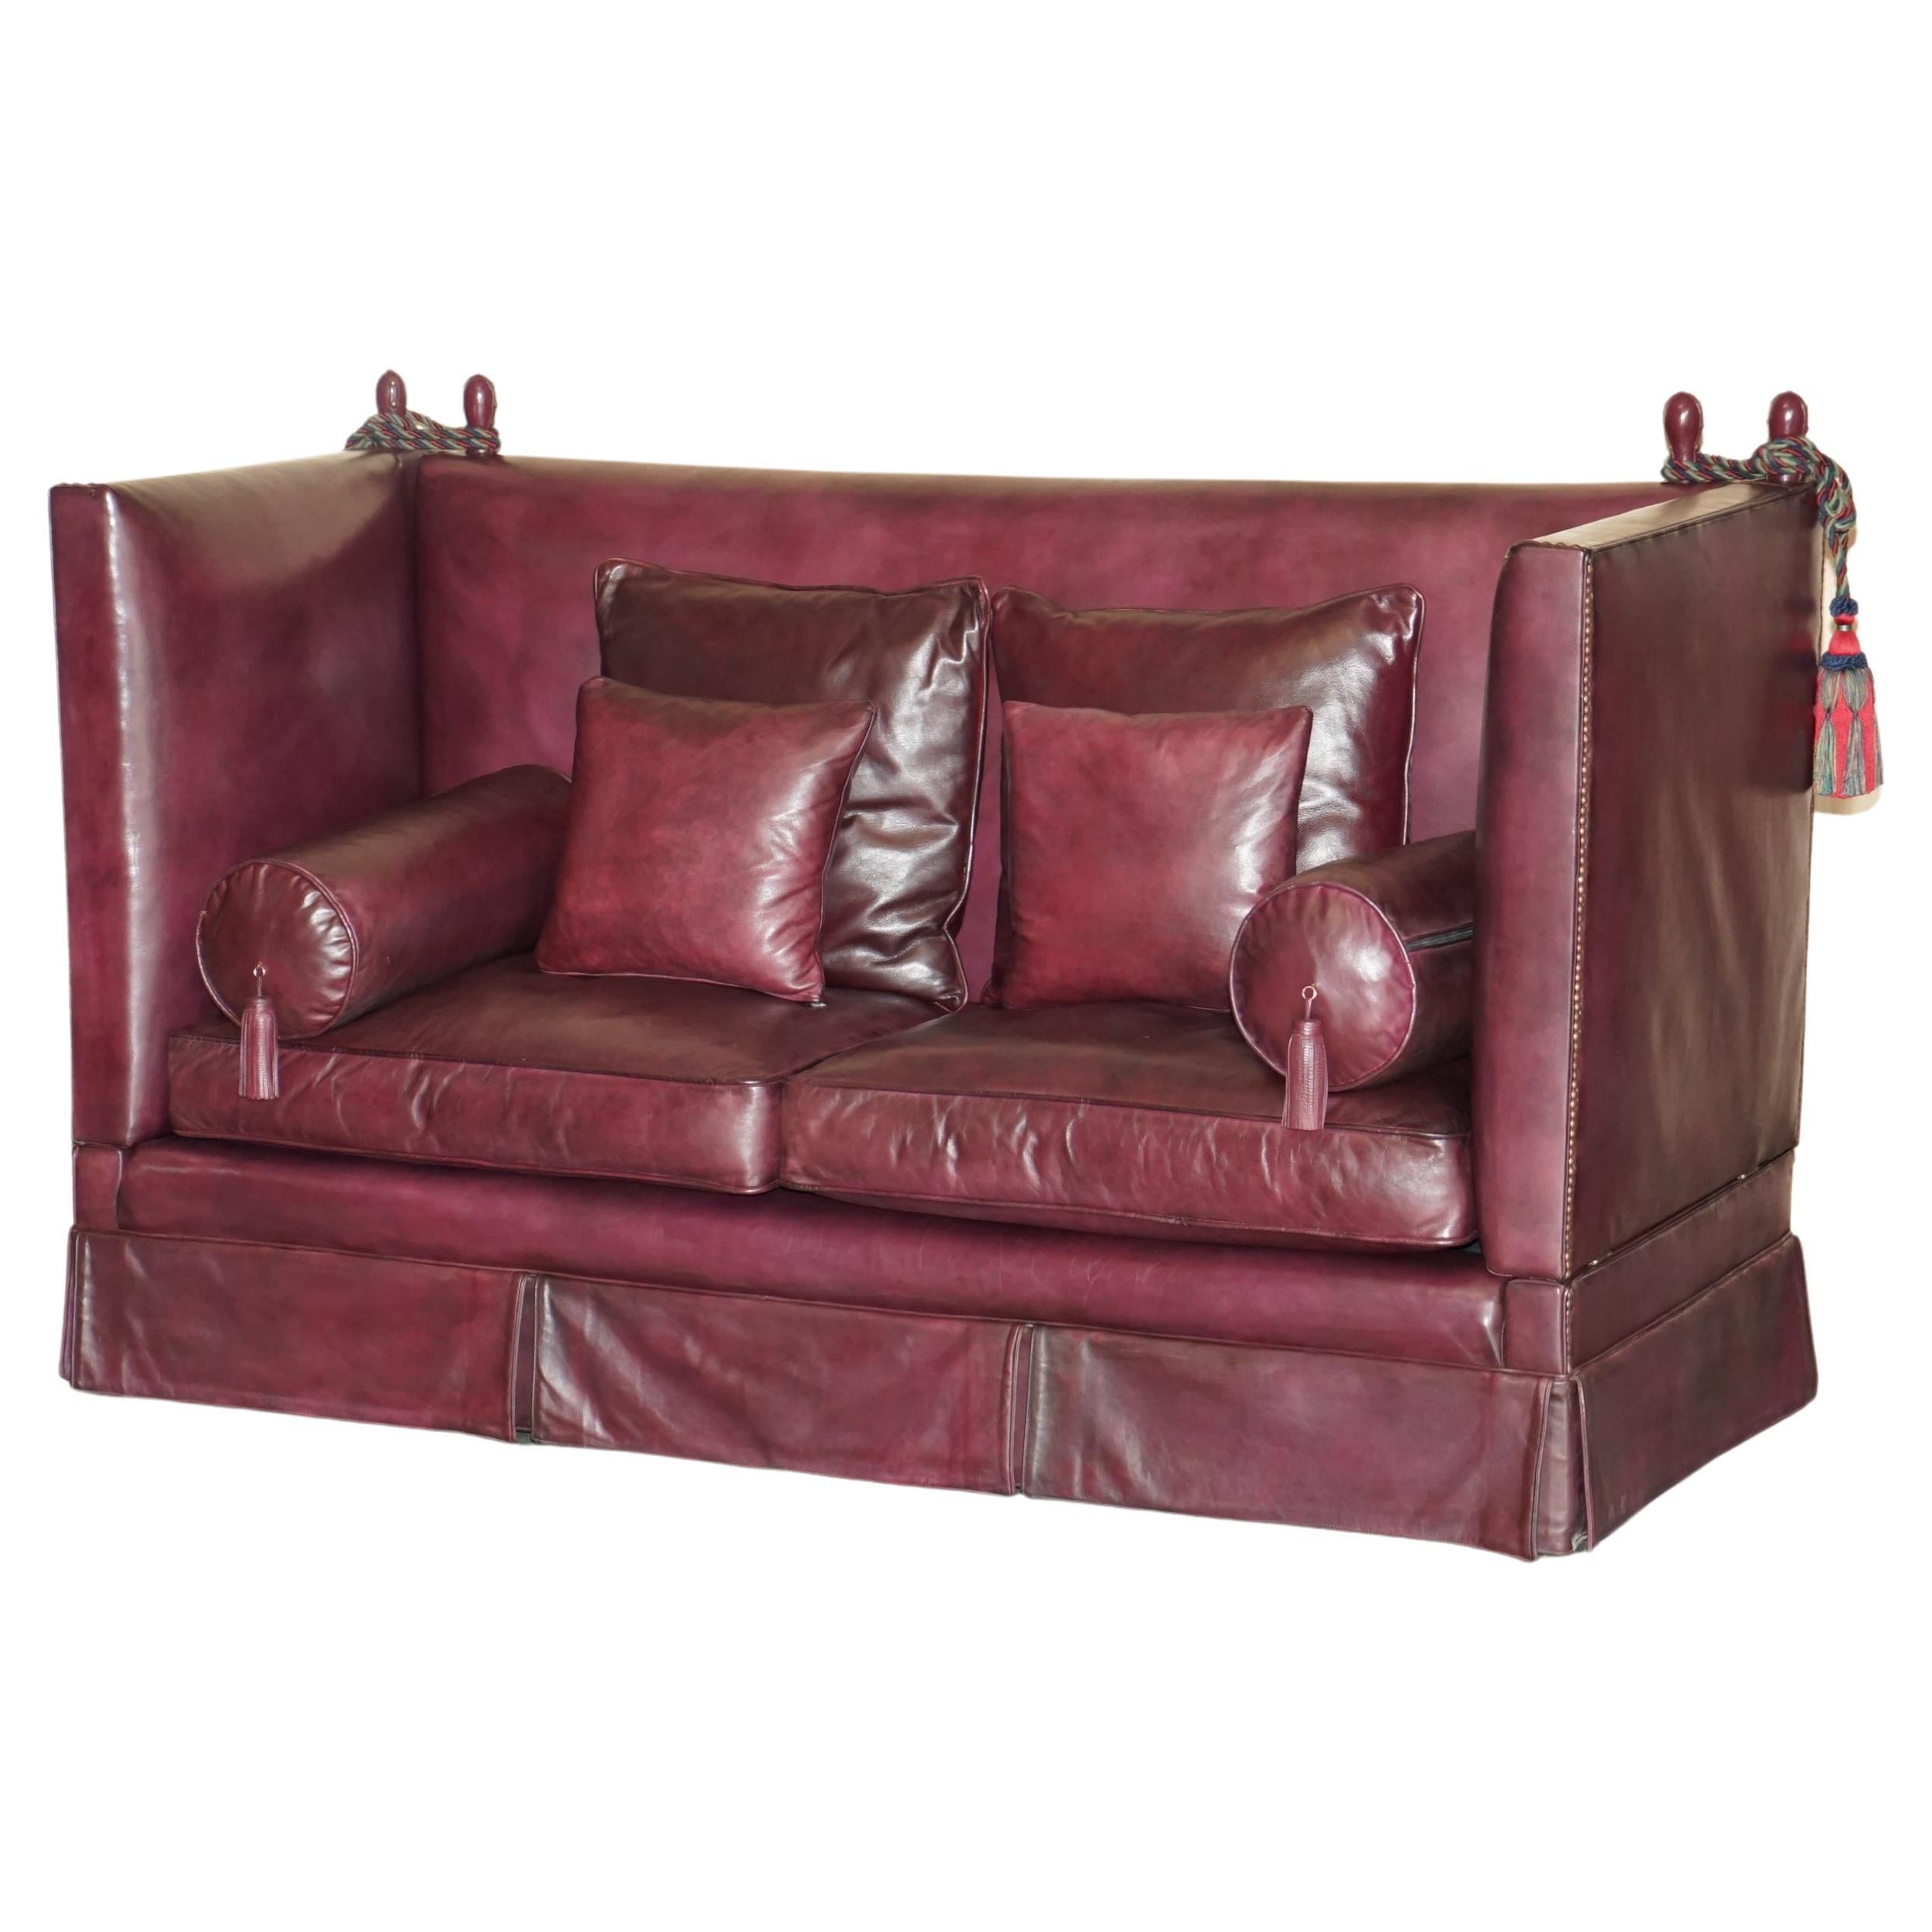 Fully Restored Antique Victorian Oxblood Knoll Sofa Feather Filled Cushions For Sale